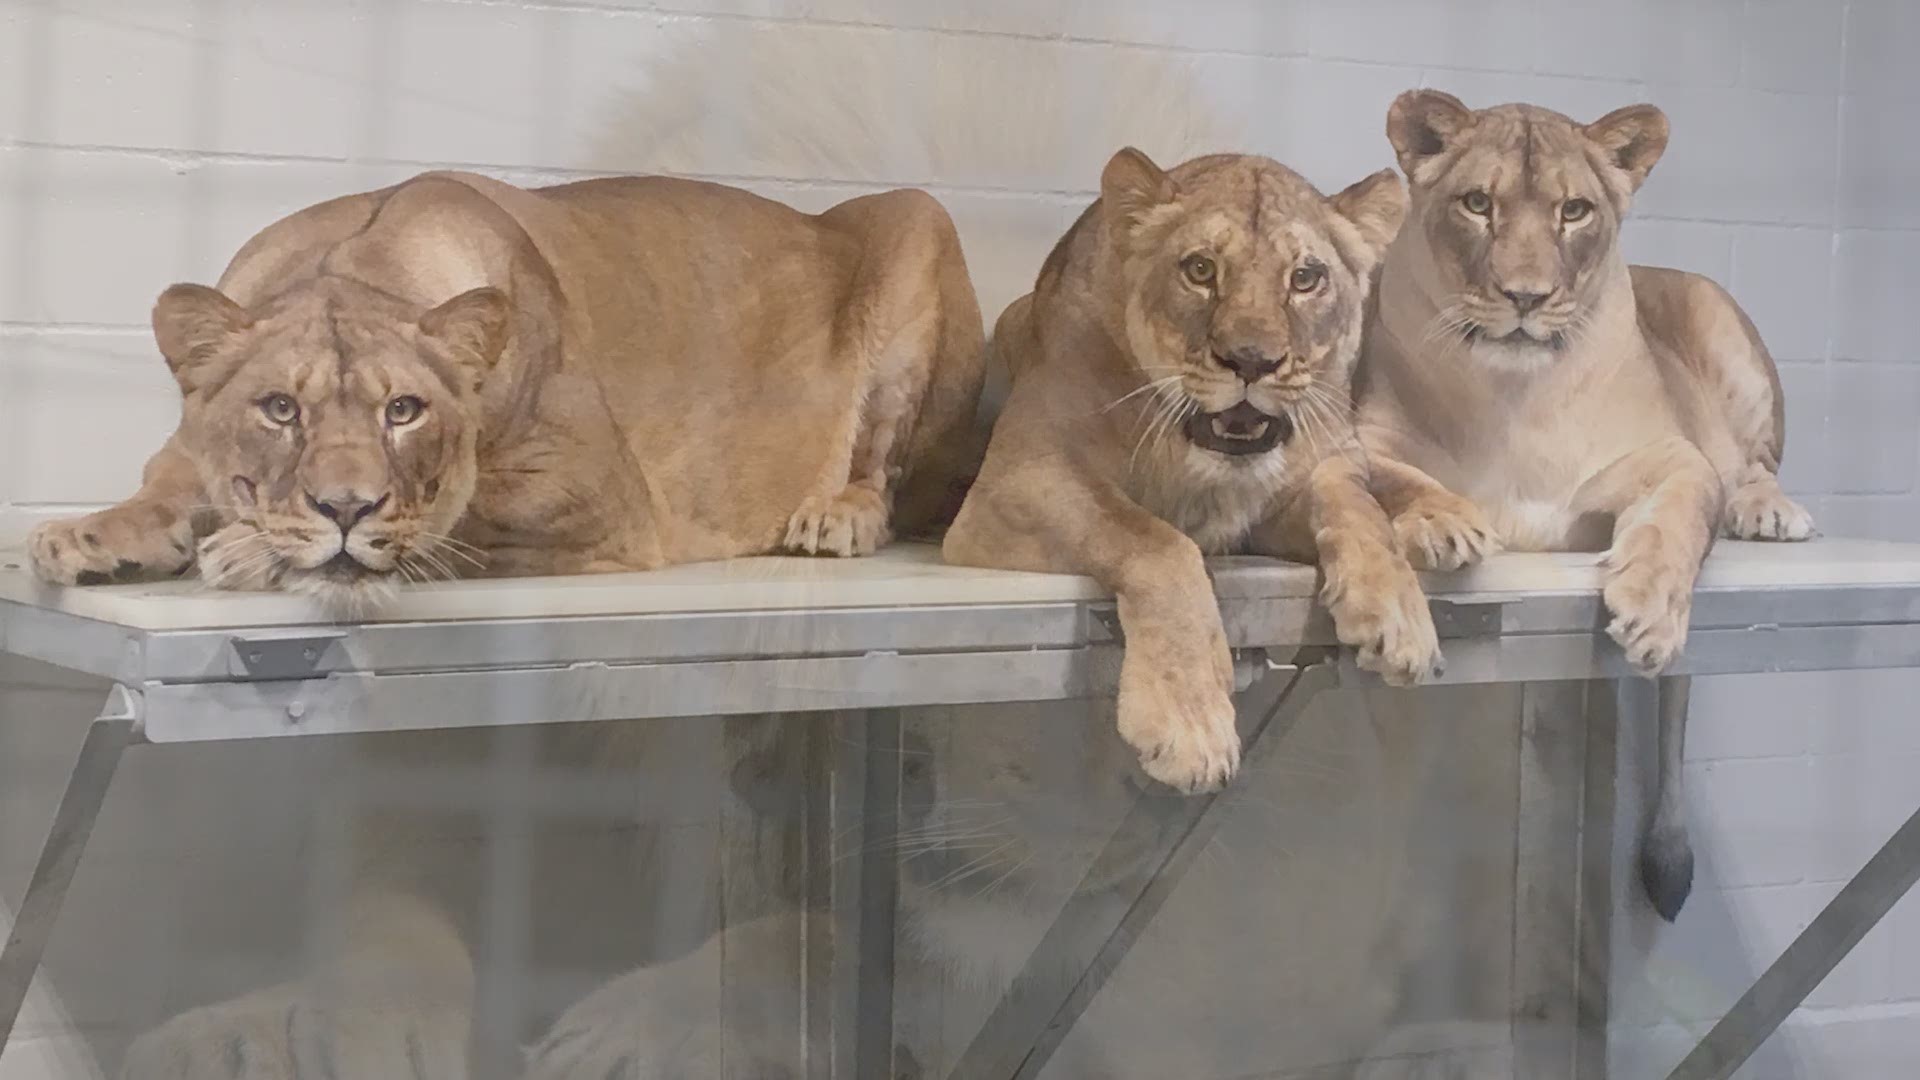 The lion population in the wild — more than 450,000 in the 1940s — has dwindled to around 20,000 today. Audubon Zoo is taking a step to reverse this decline with the highly-anticipated opening of its new lion habitat, scheduled for Saturday, May 18.